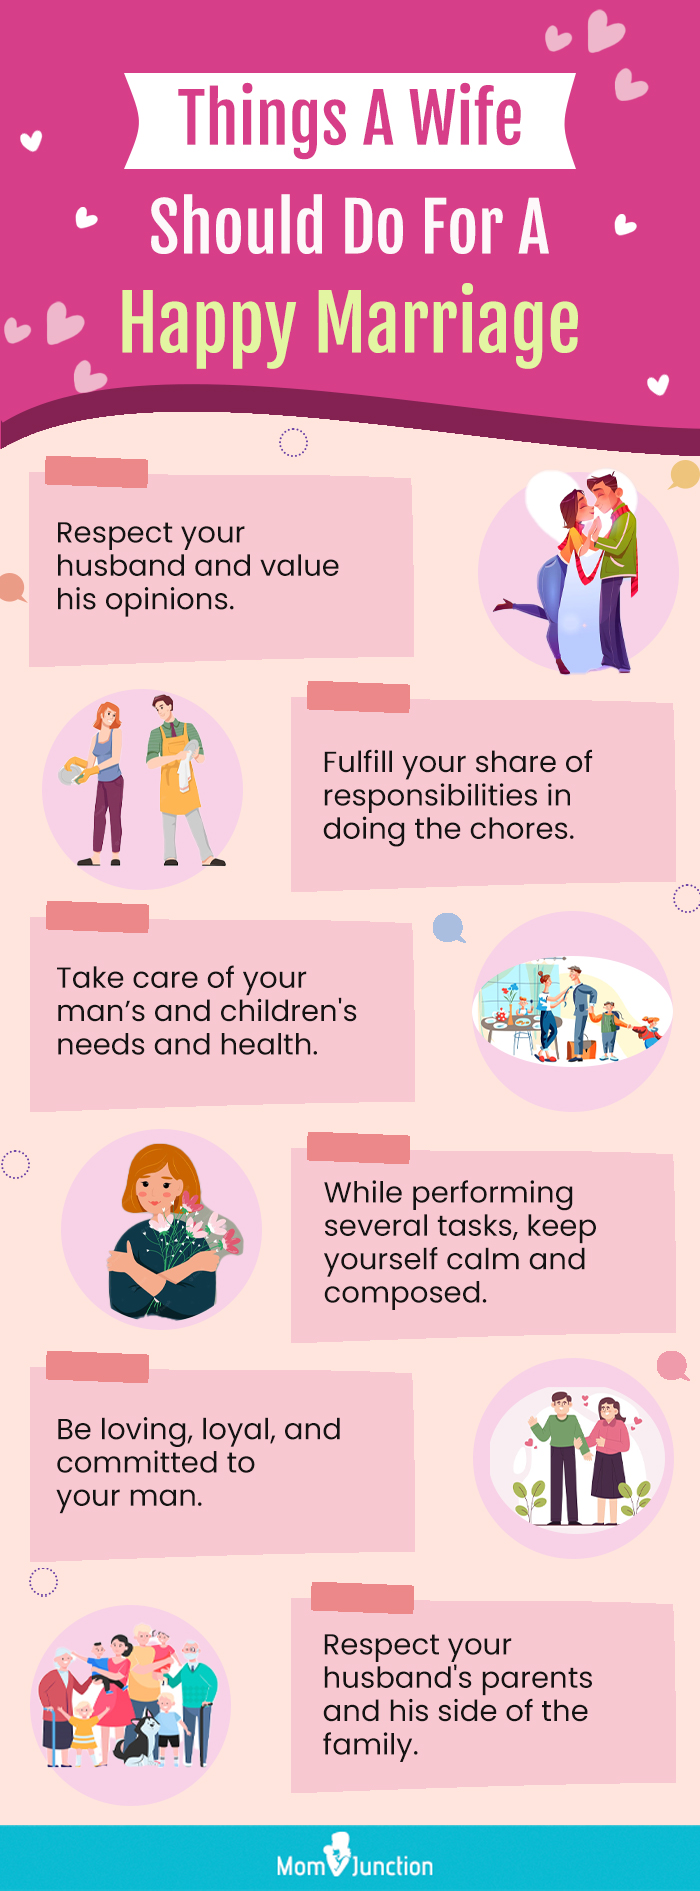 Role Of A Wife 17 Things To Do For A Happy Marriage pic